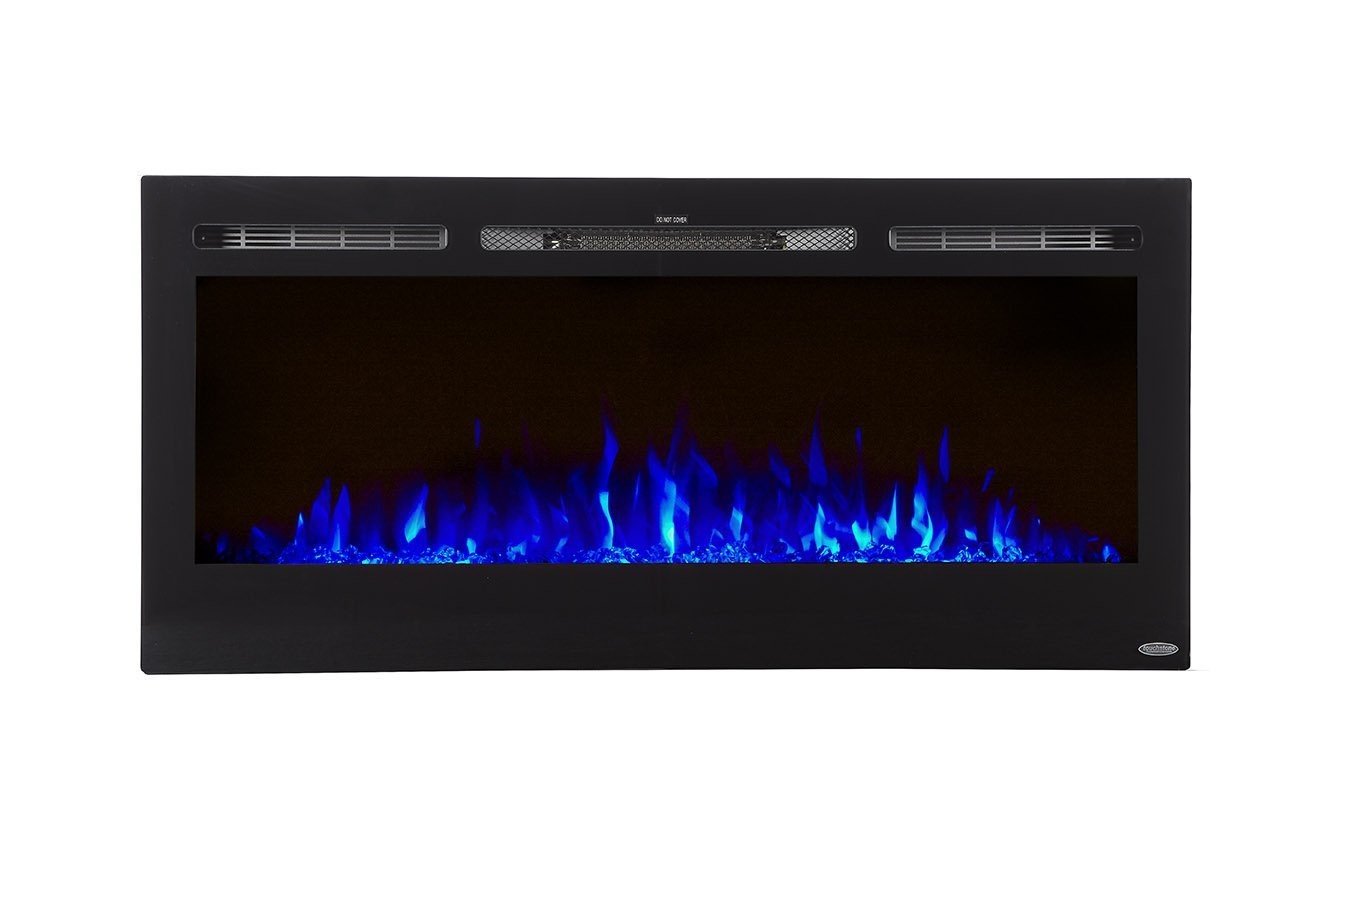 Touchstone Sideline 45 80025 45" Recessed Electric Fireplace